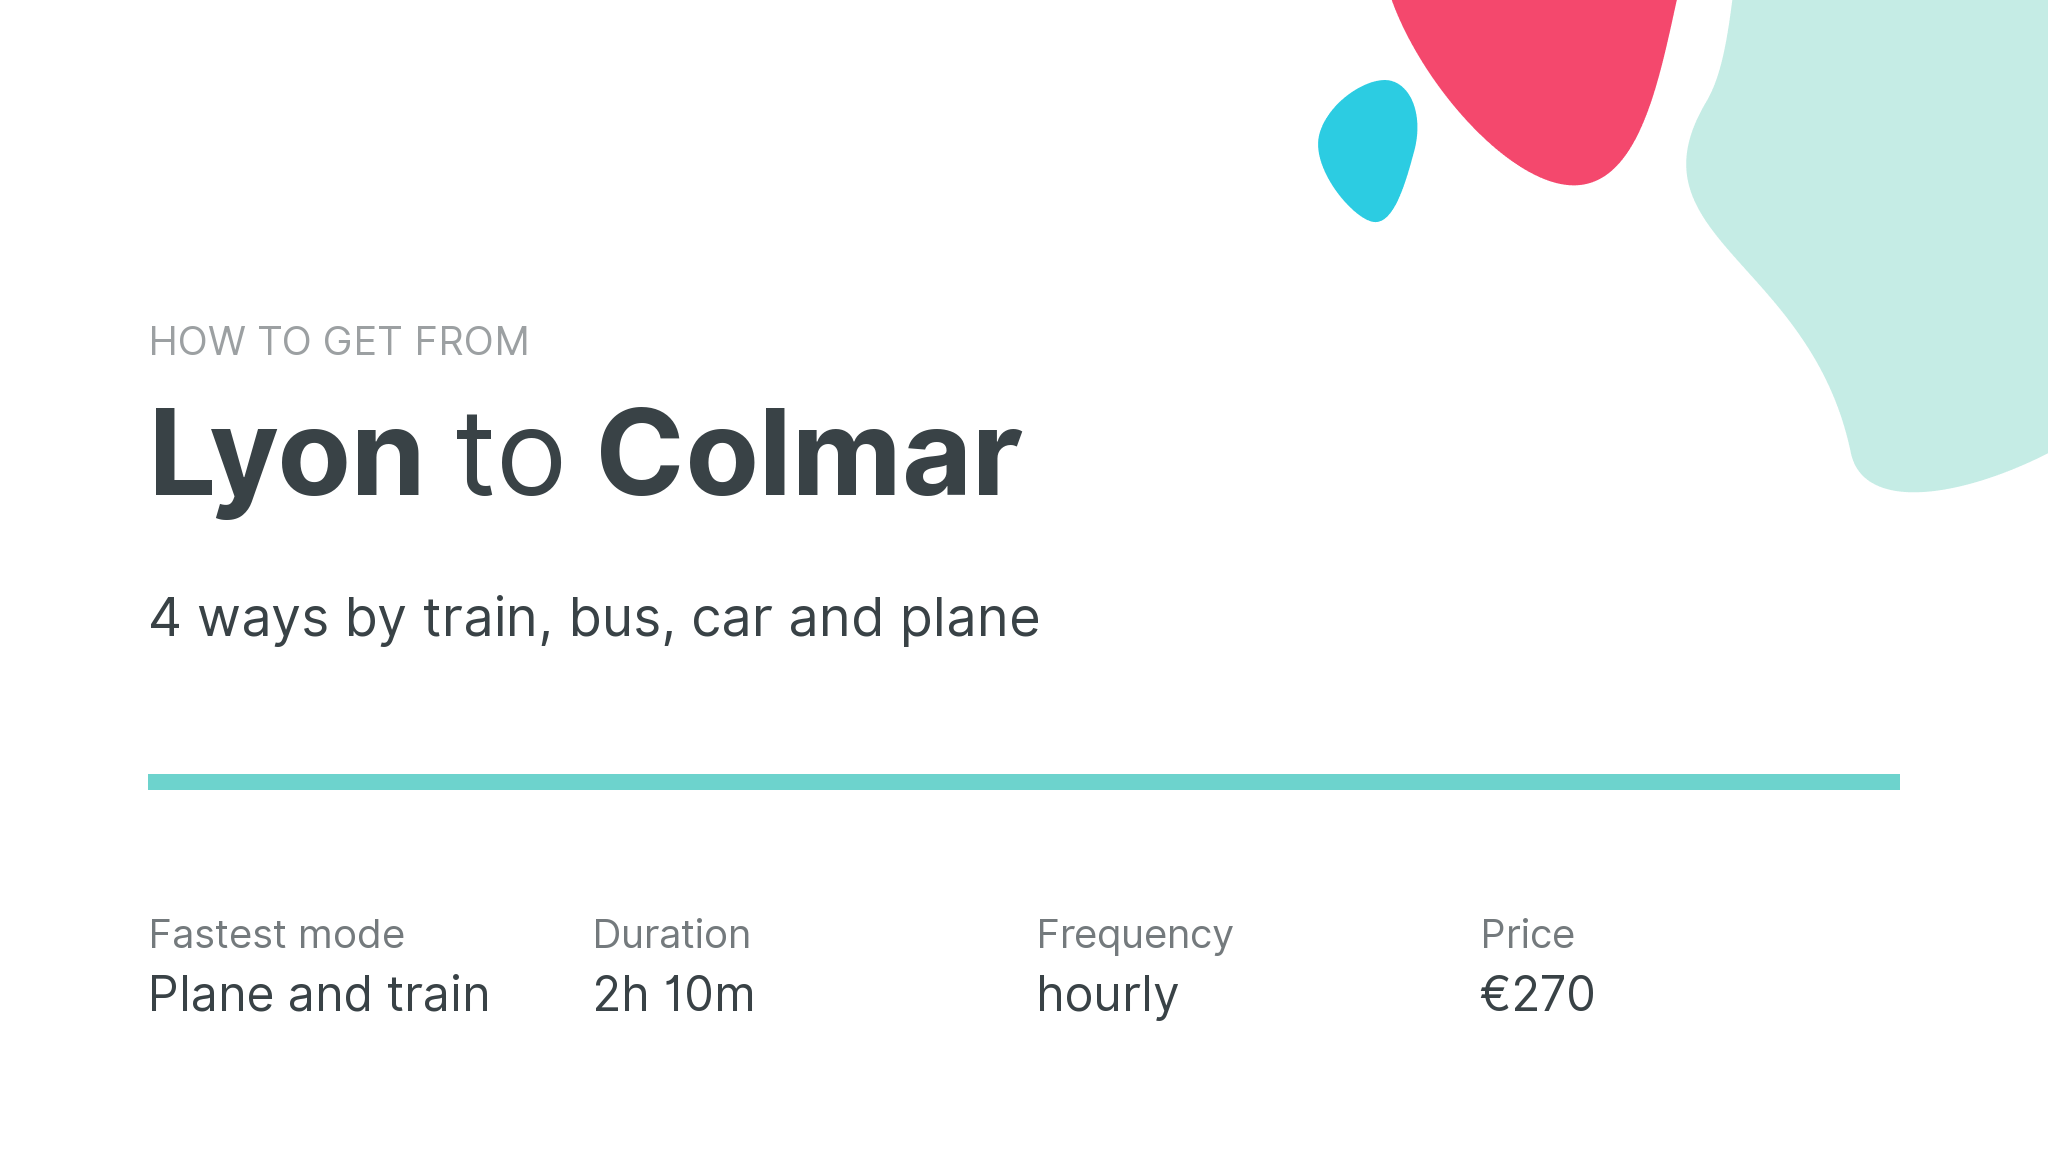 How do I get from Lyon to Colmar